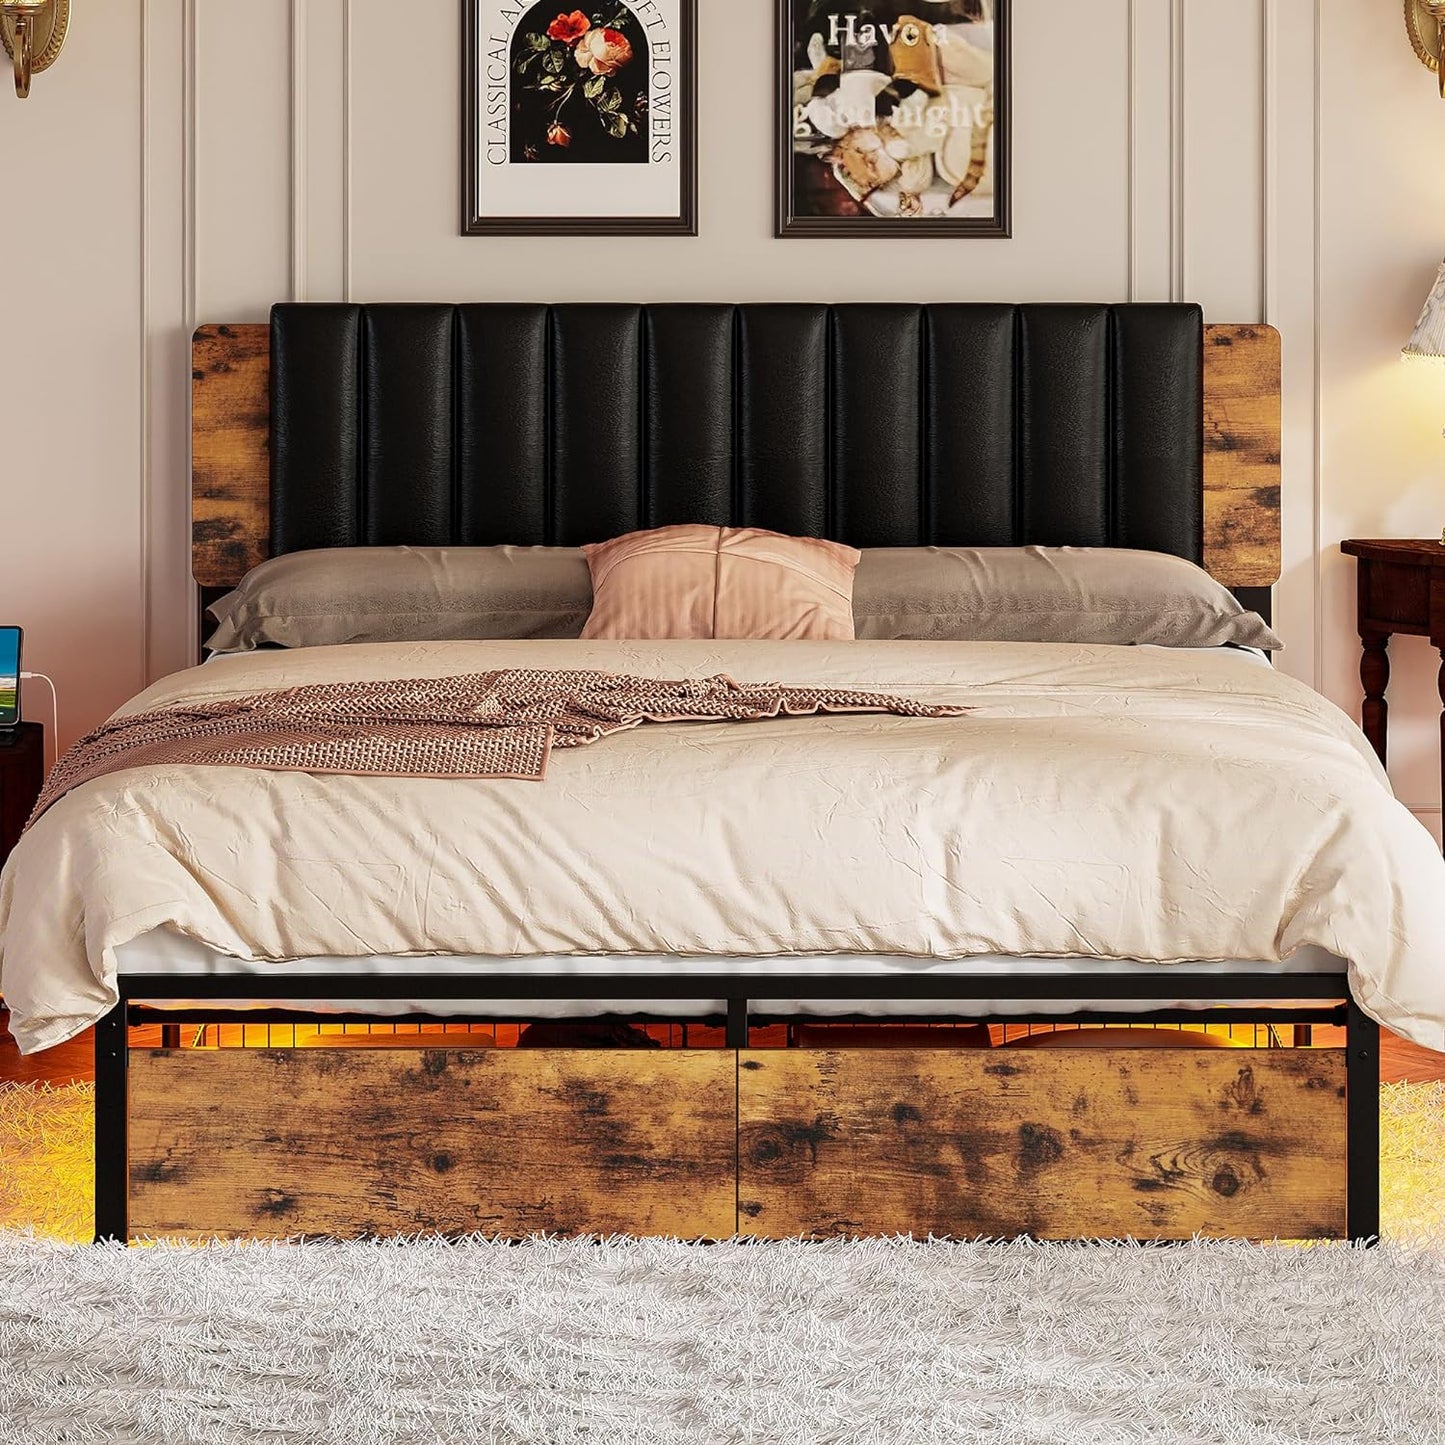 Bed Frame with Removable PU Leather headboard